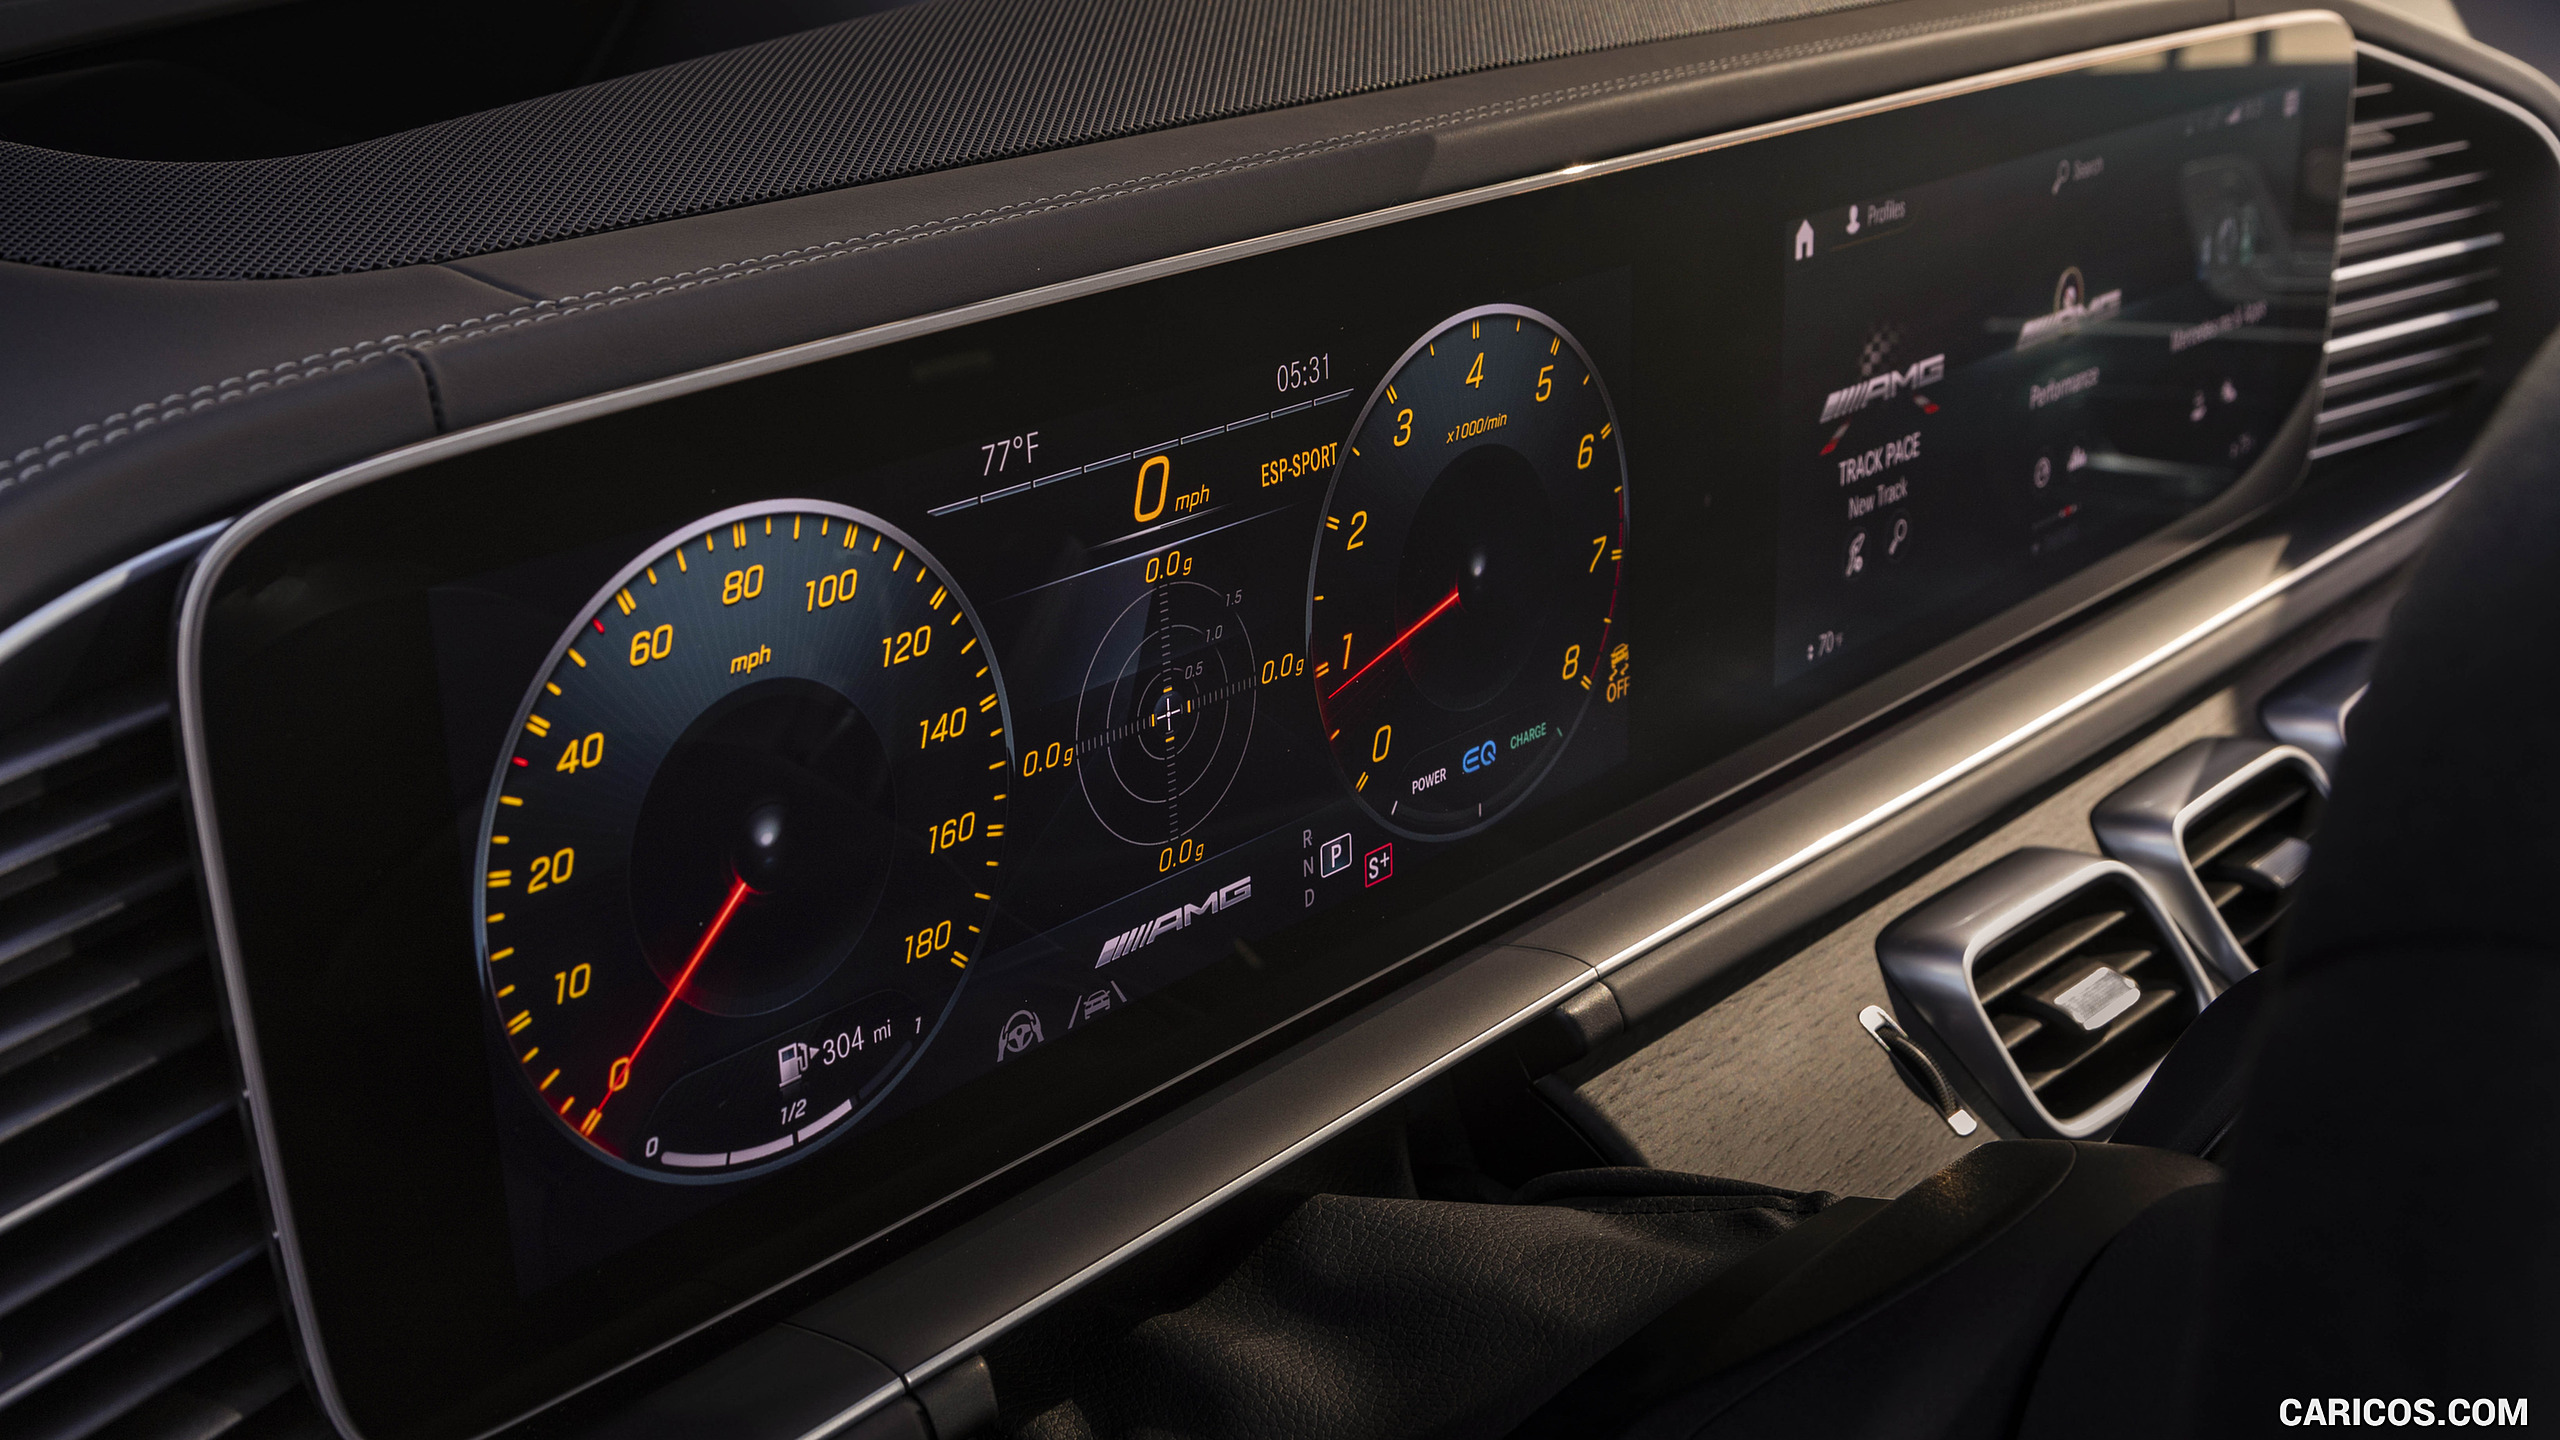 2021 Mercedes-AMG GLE 53 Coupe - Digital Instrument Cluster, #160 of 178